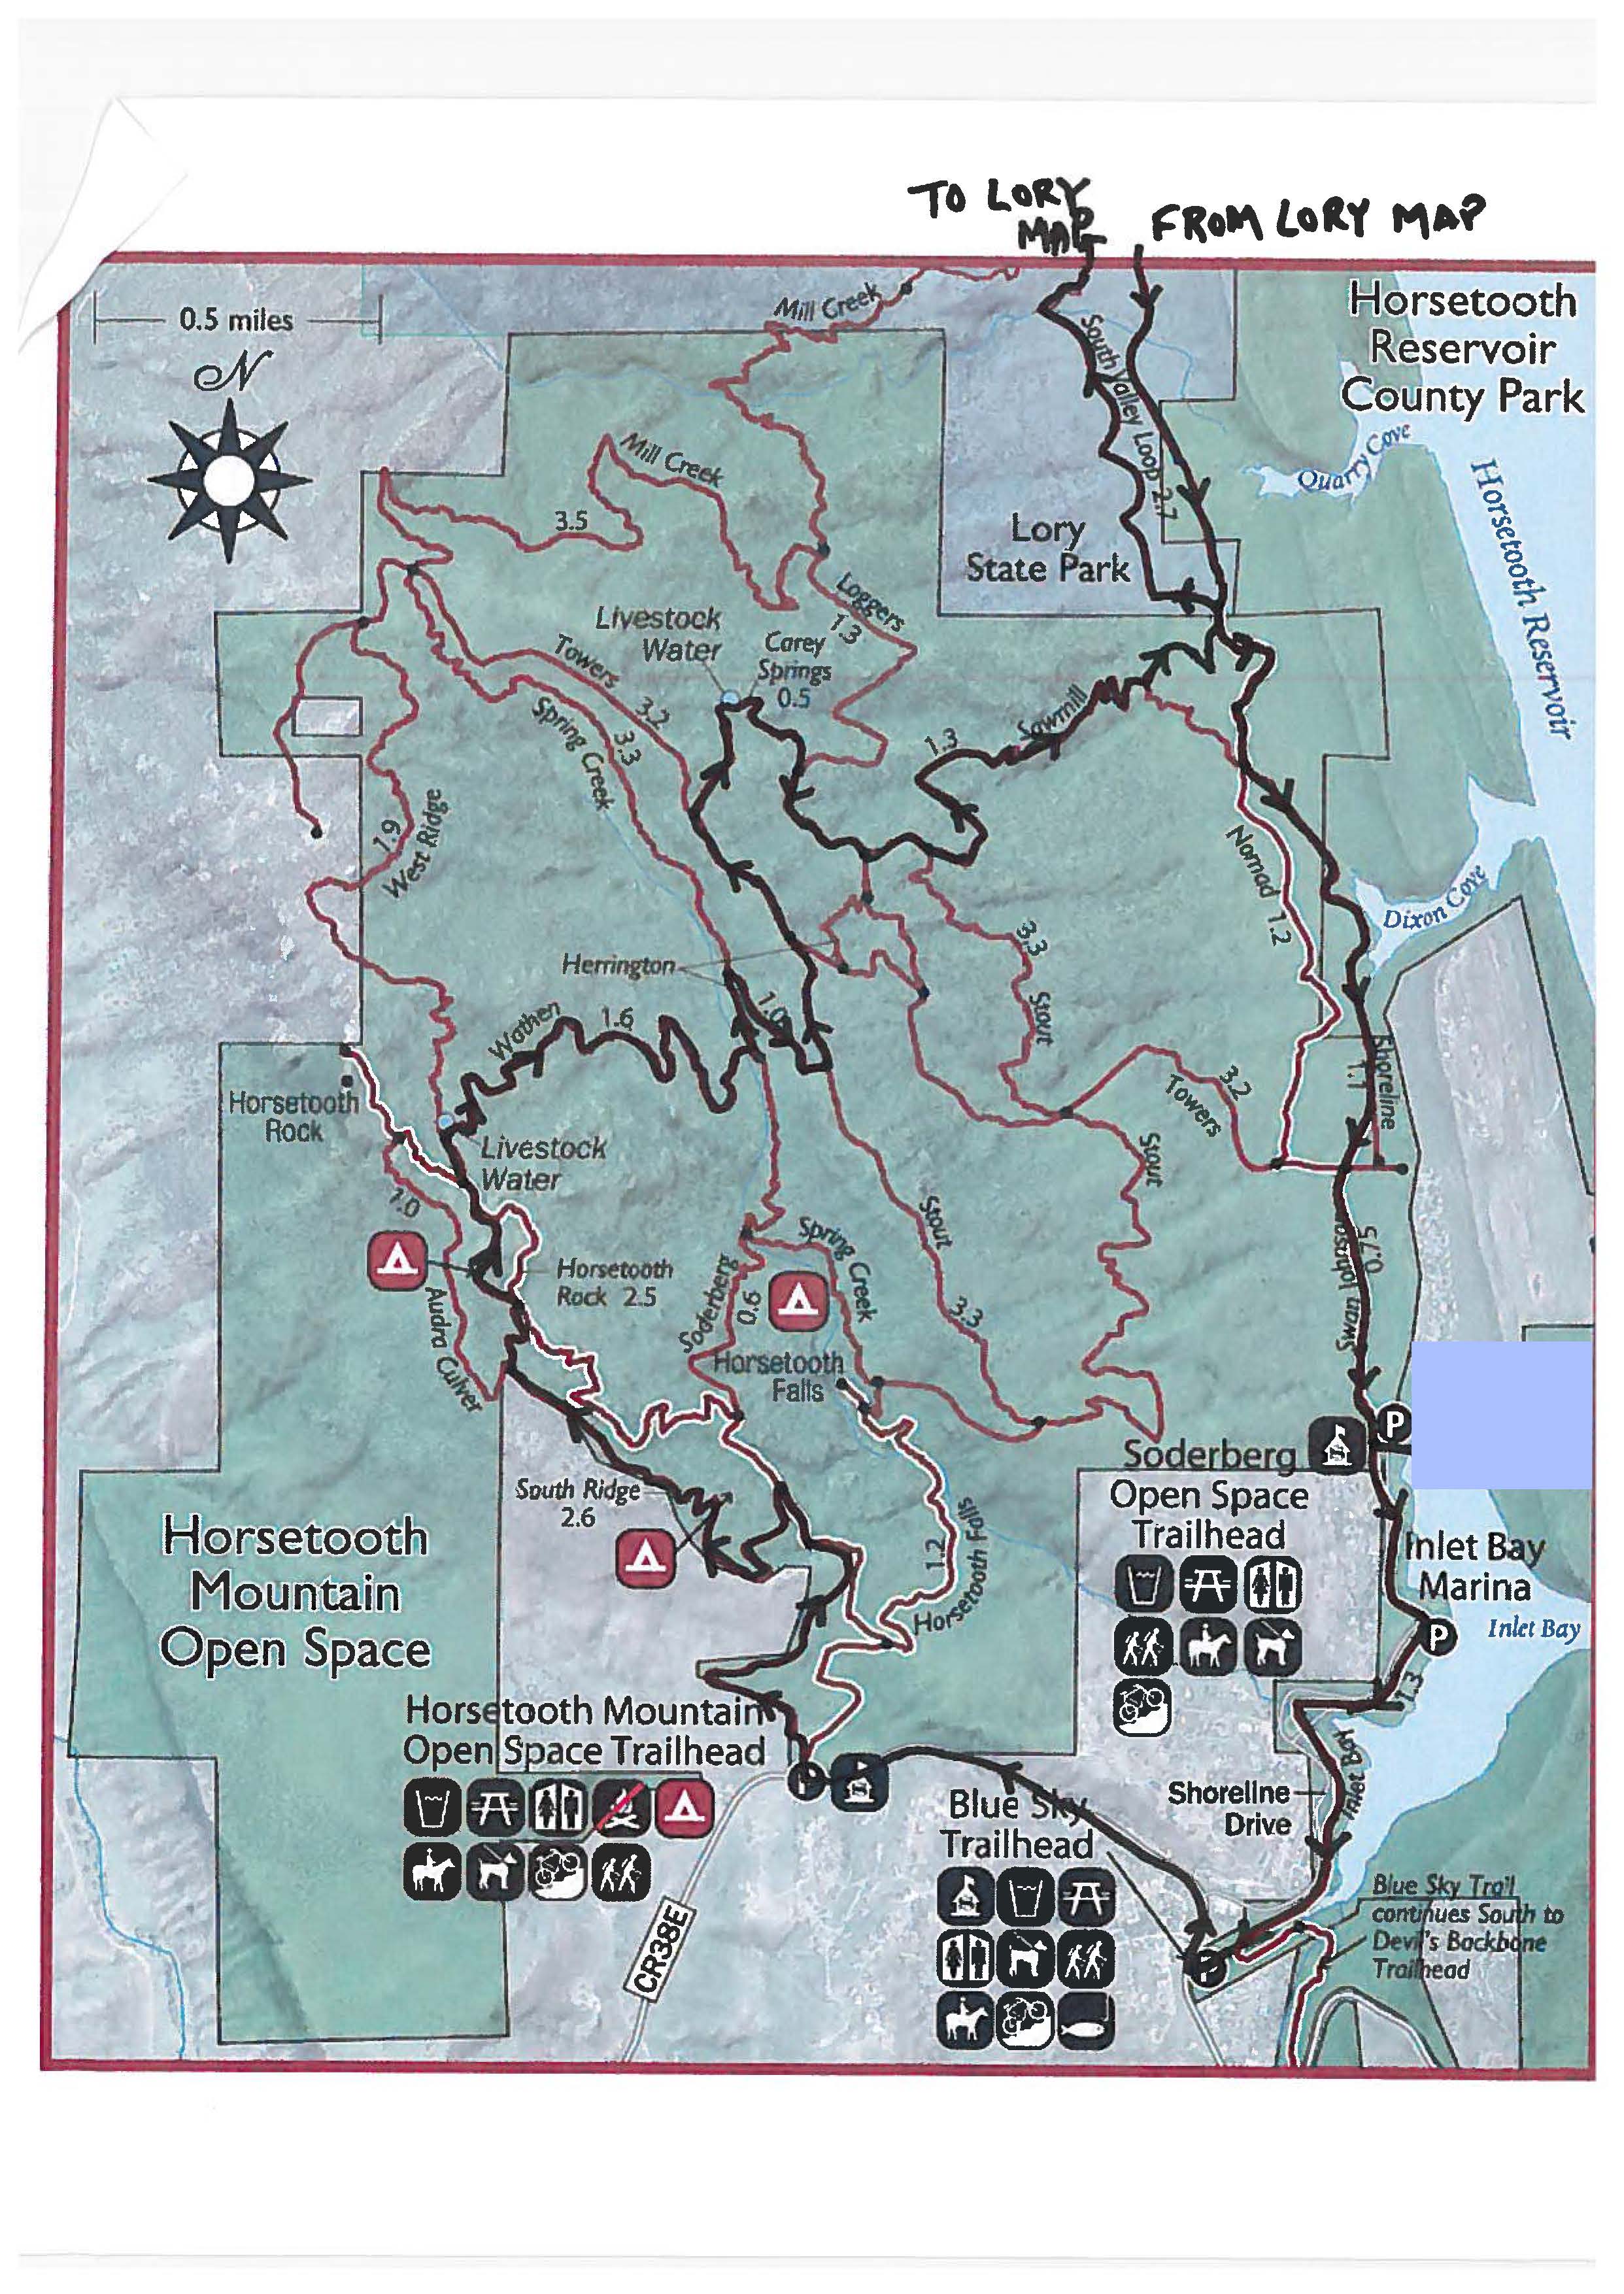 Copy of Map 2 - Horsetooth Mountain Park (the south bit)